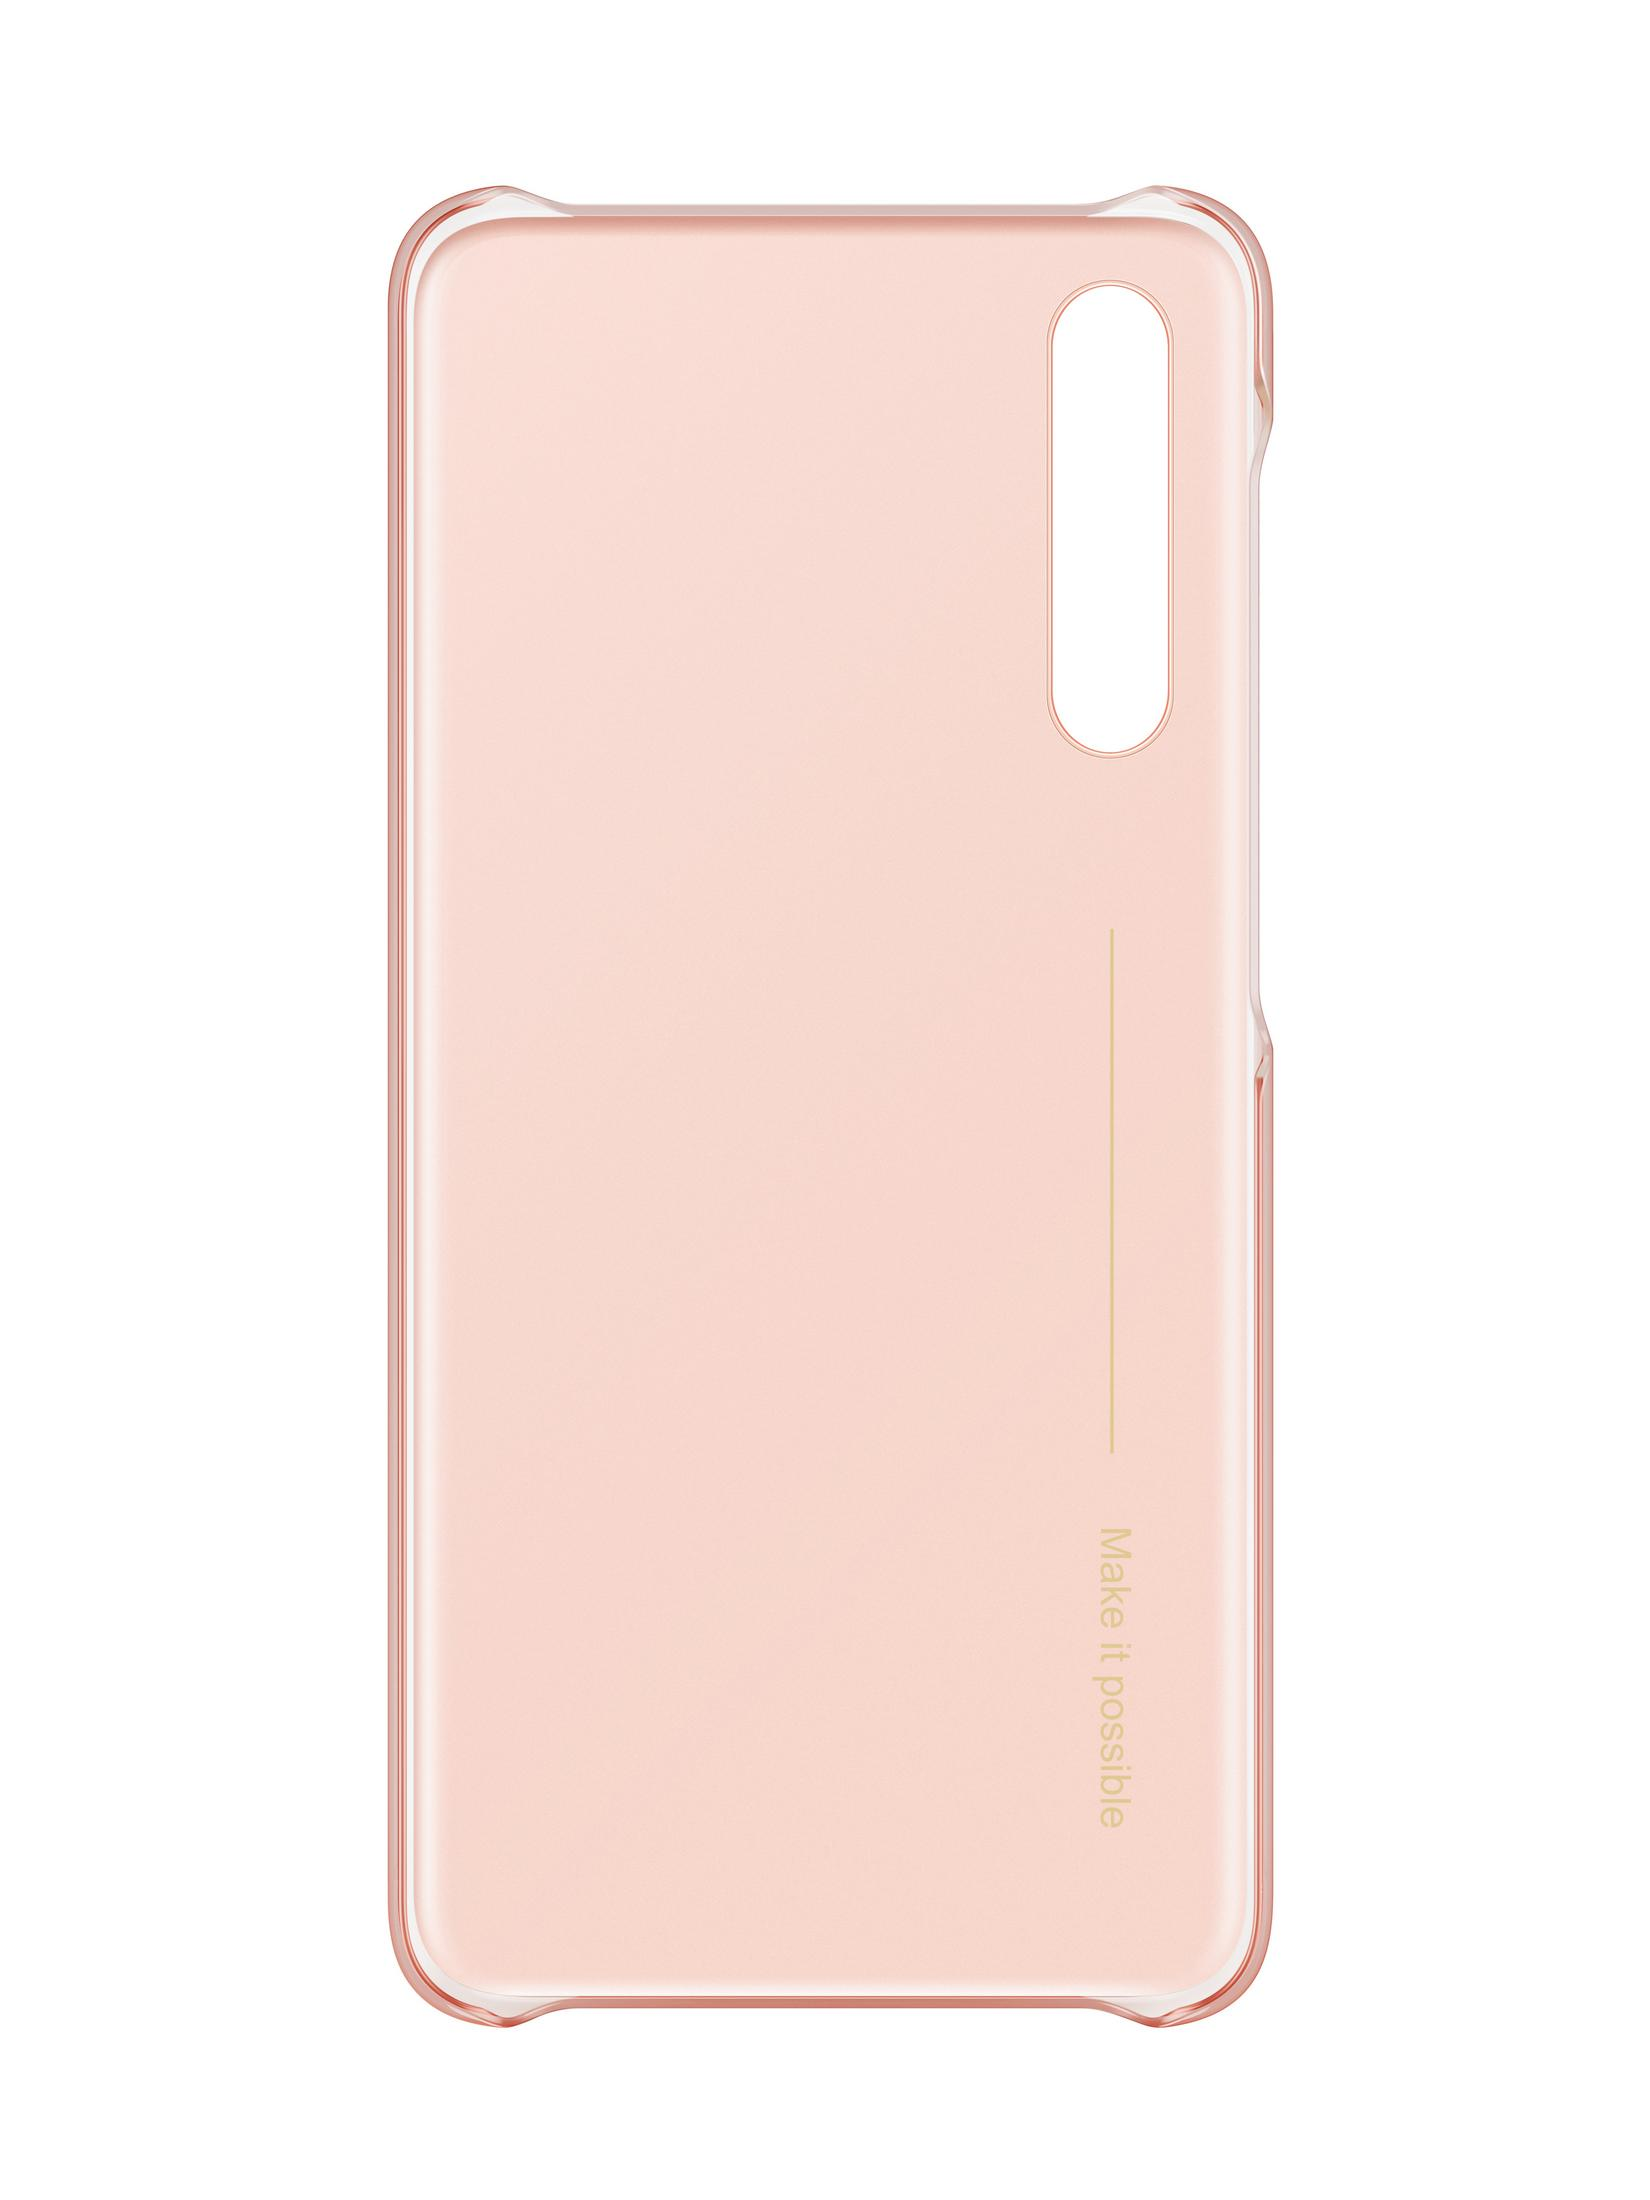 Huawei, 51992376 P20 HUAWEI CASE Pink Backcover, PRO COLOR P20 PINK, Pro,